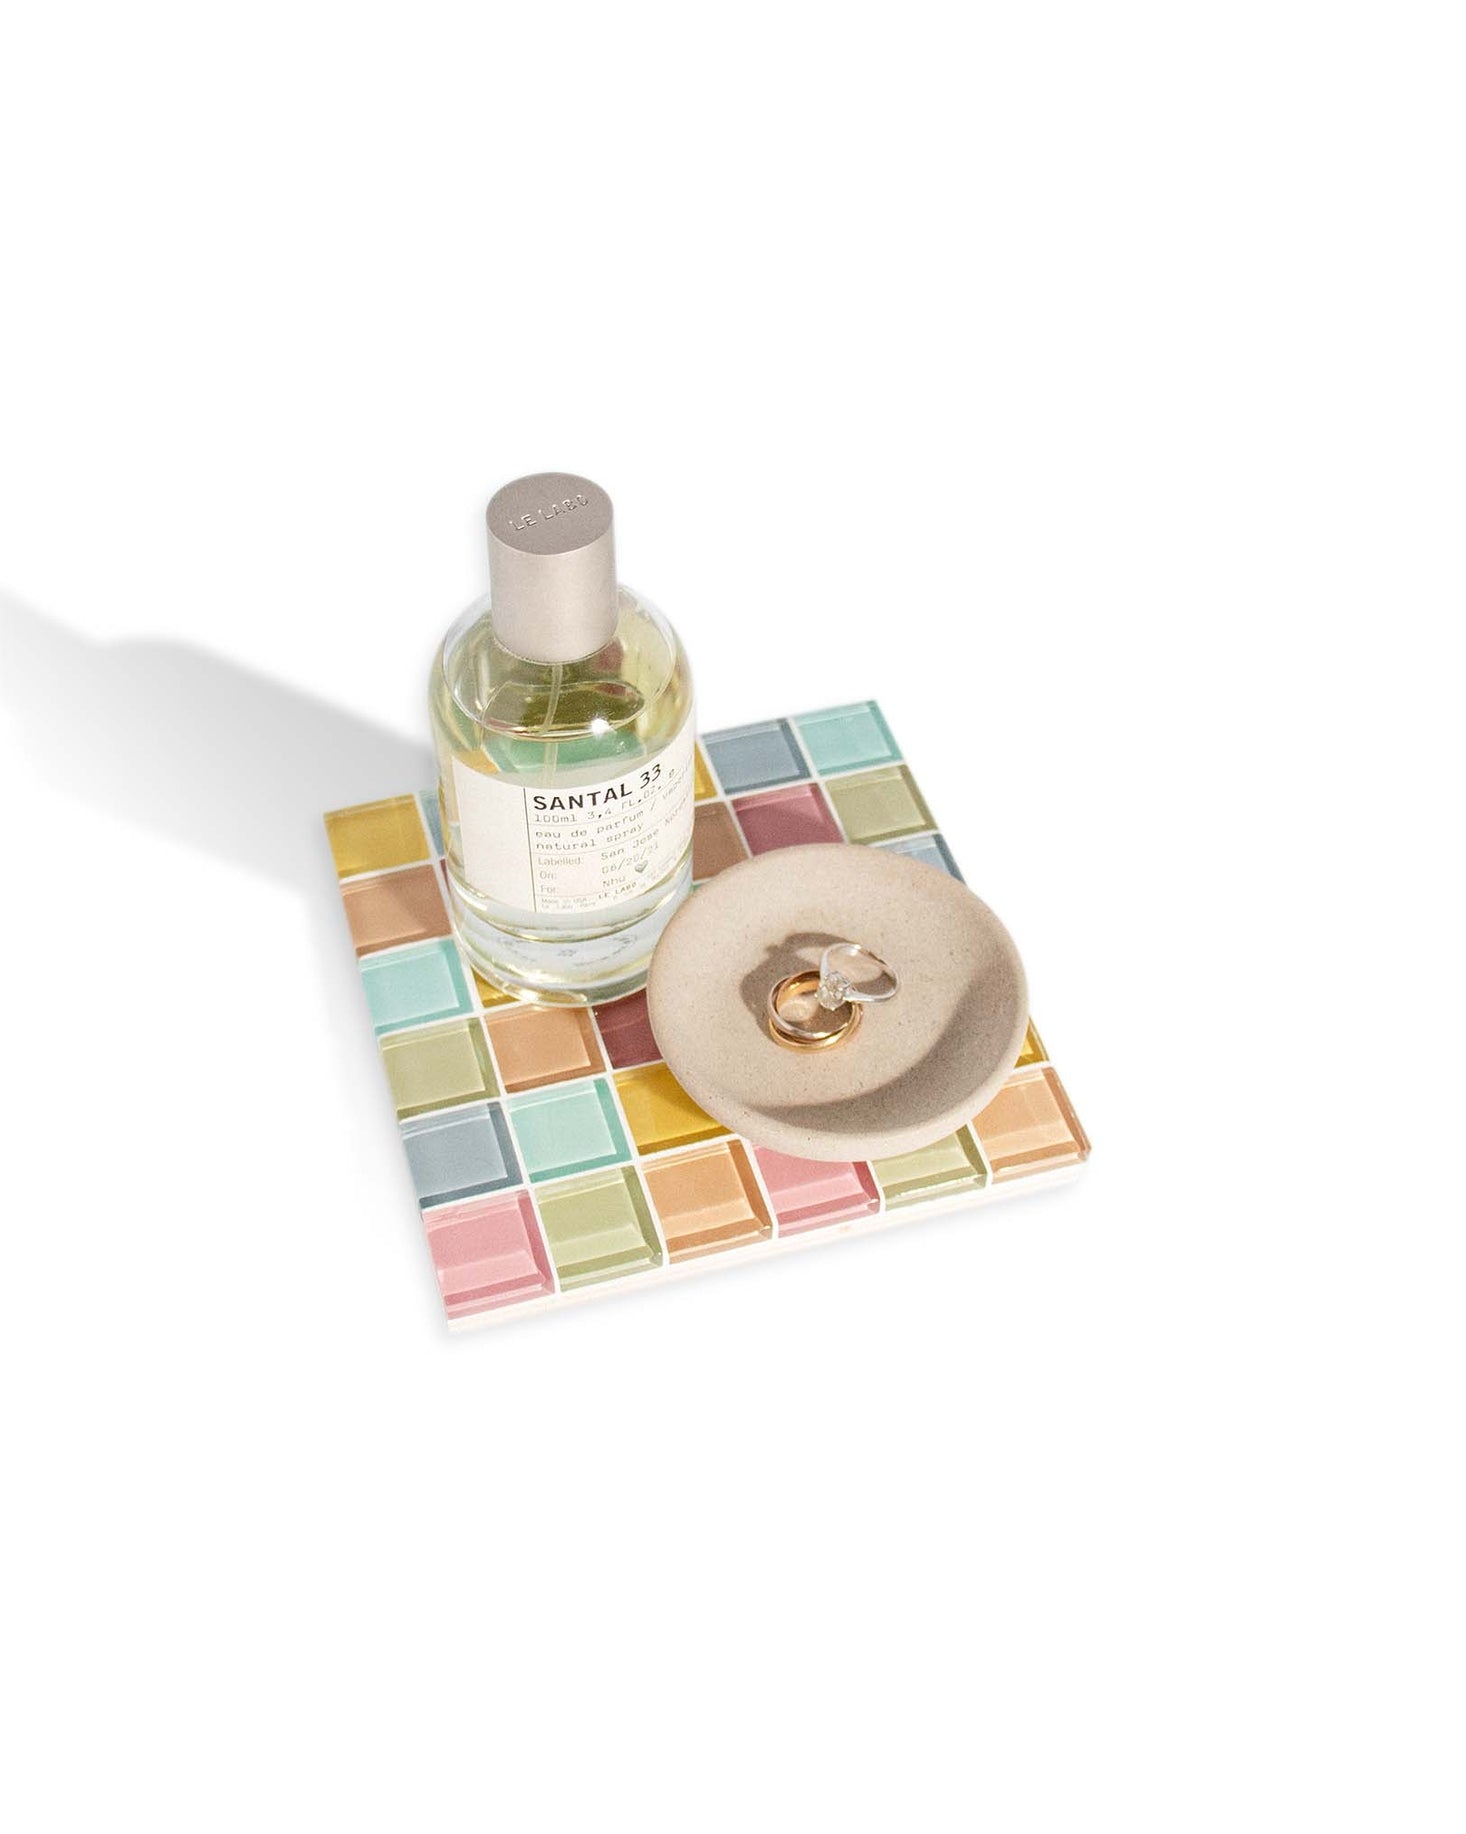 Handcrafted decorative tray made with high quality glass tiles. They don't just have to be for decoration, use them for whatever your heart desires honestly; jewelry catchall, food display... They're just dreamy little pops of color for your space!